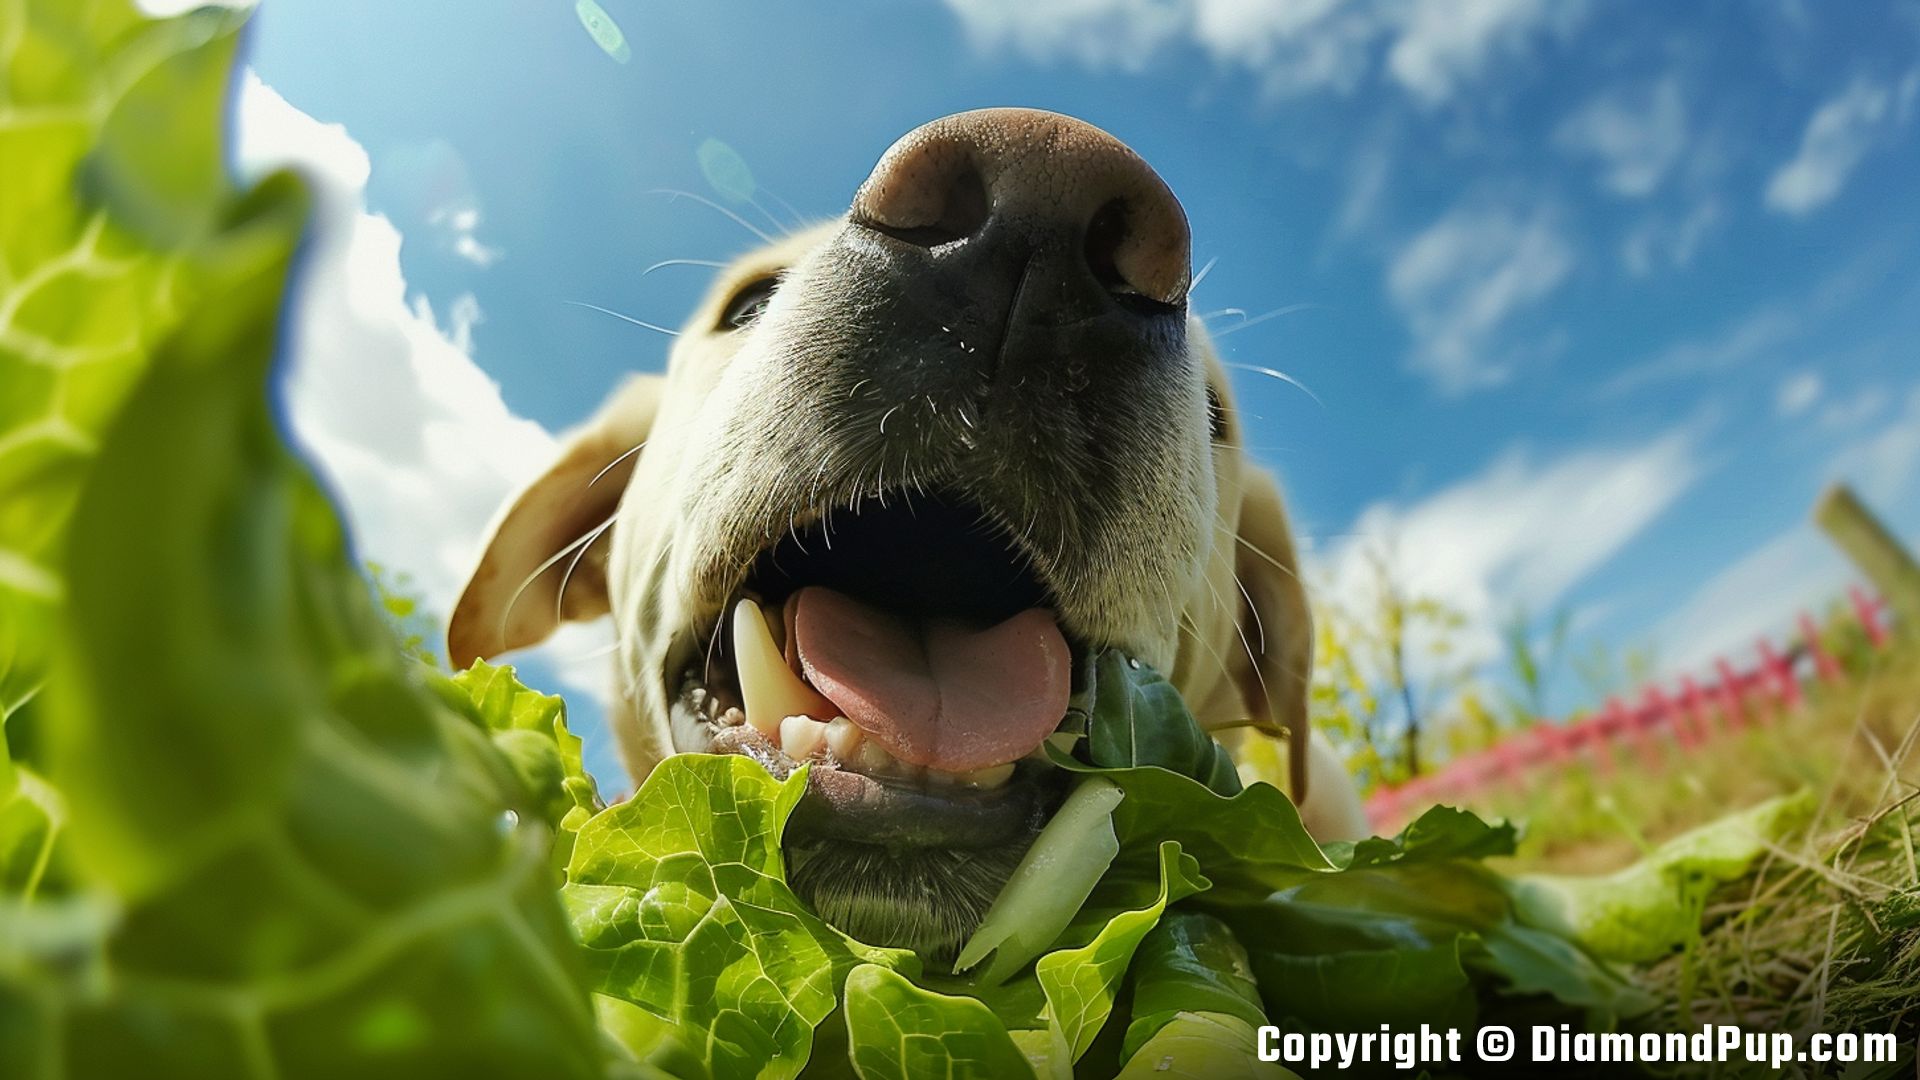 Image of a Playful Labrador Snacking on Lettuce